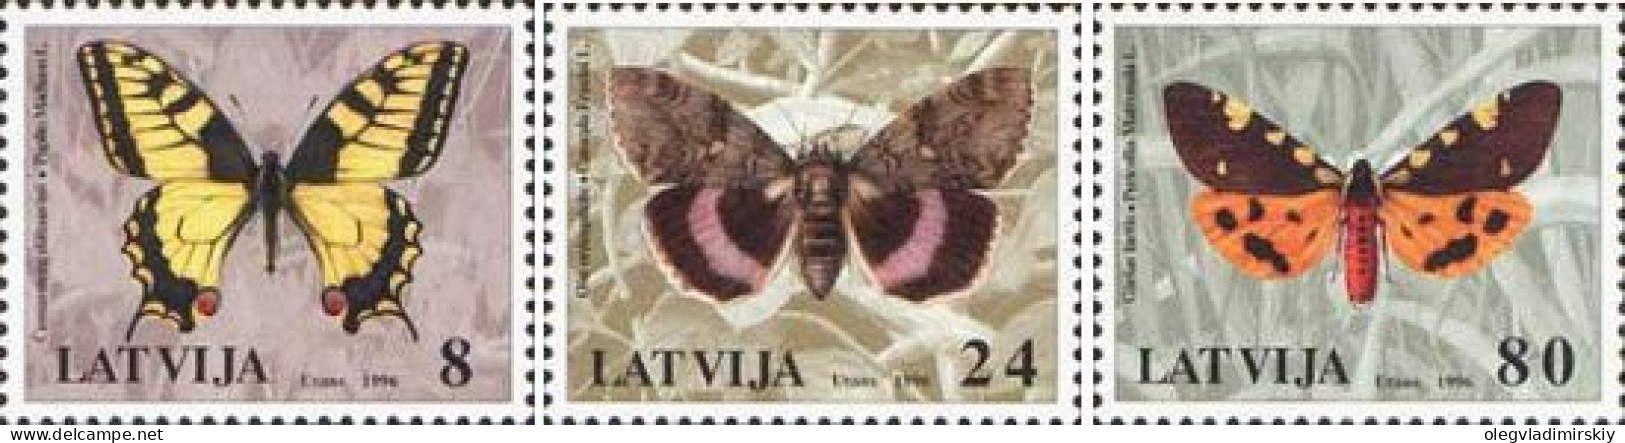 Latvia Lettland Lettonie 1996 Butterflies Set Of 3 Stamps MNH - Papillons